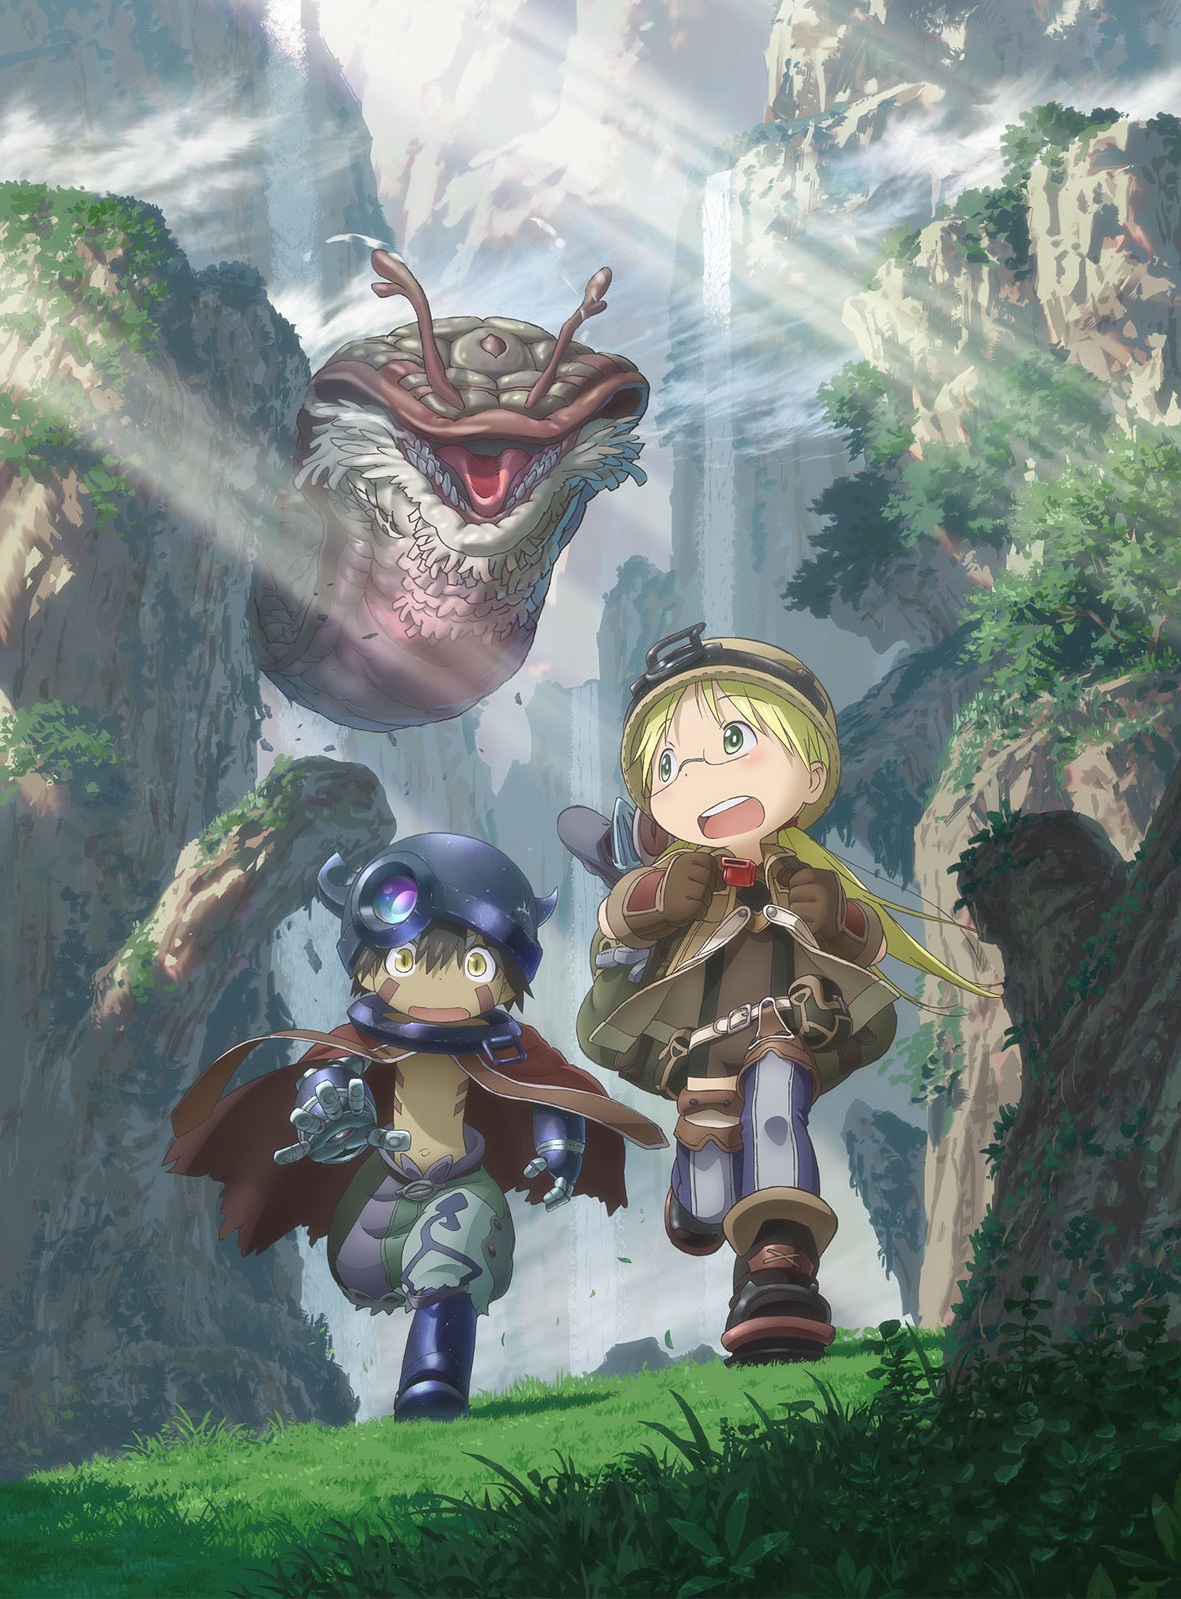 Made_in_Abyss-cover.jpg